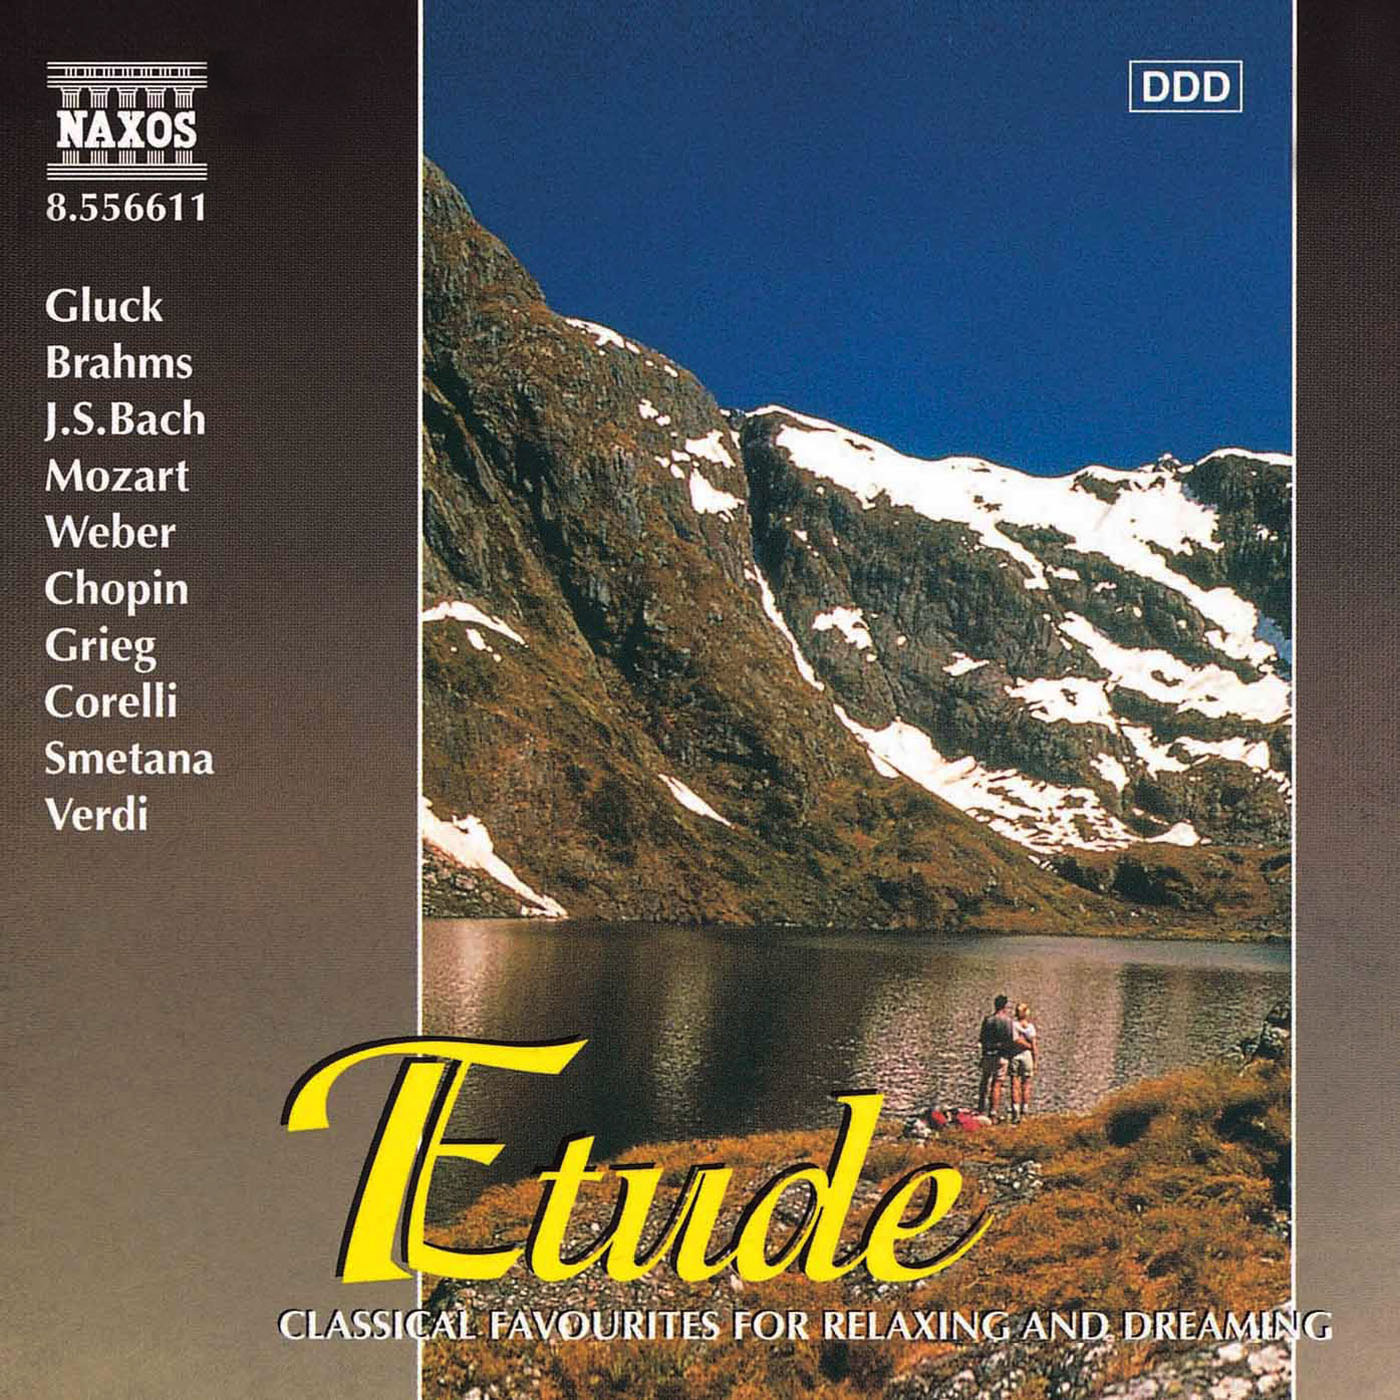 ETUDE - Classical Favourites for Relaxing and Dreaming